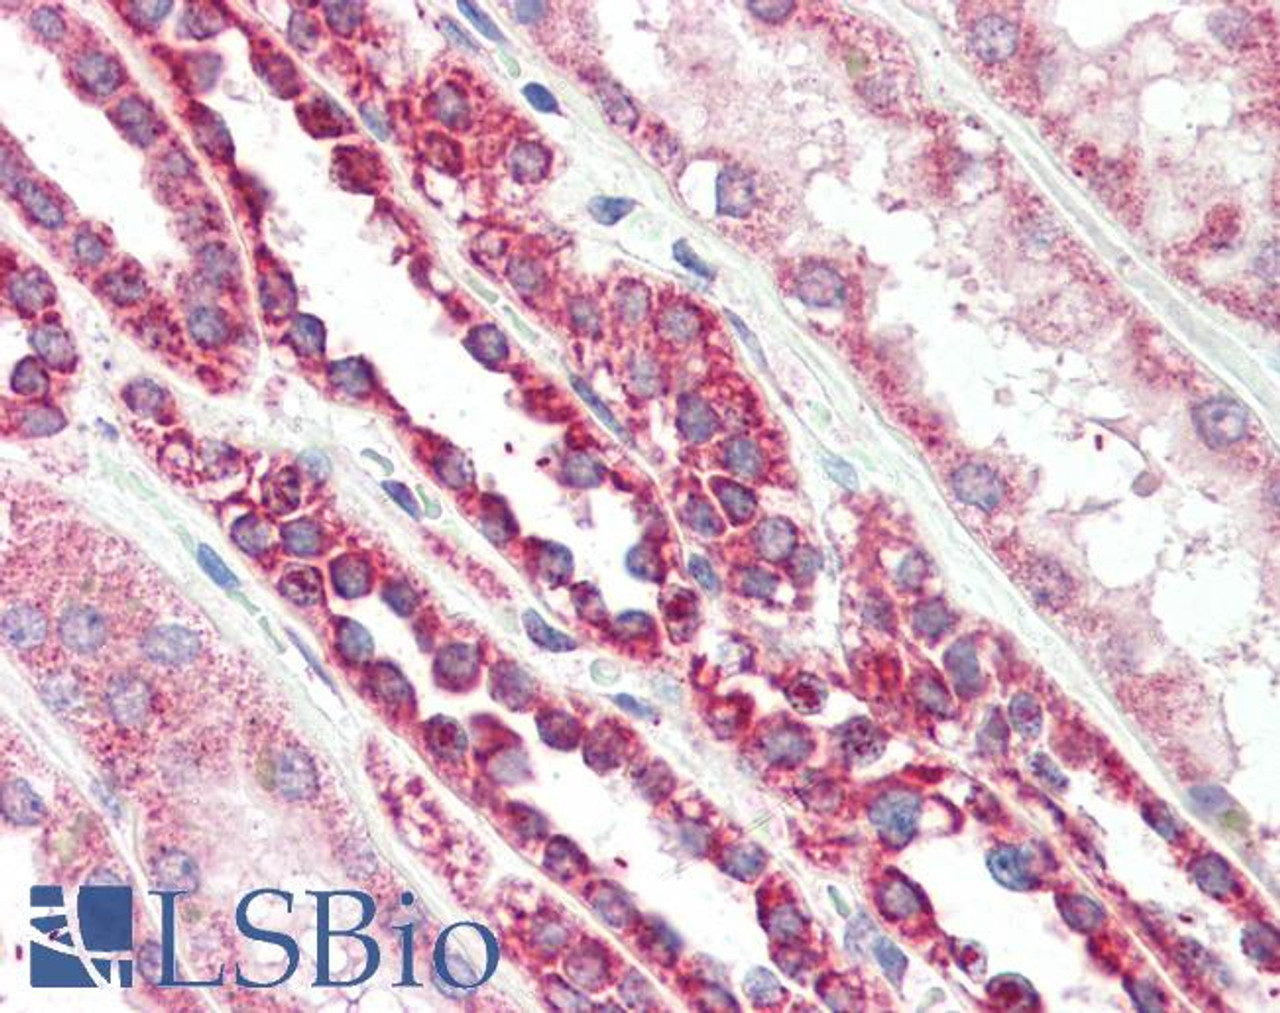 46-538 (2.5ug/ml) staining of paraffin embedded Human Colon. Steamed antigen retrieval with citrate buffer pH 6, AP-staining.